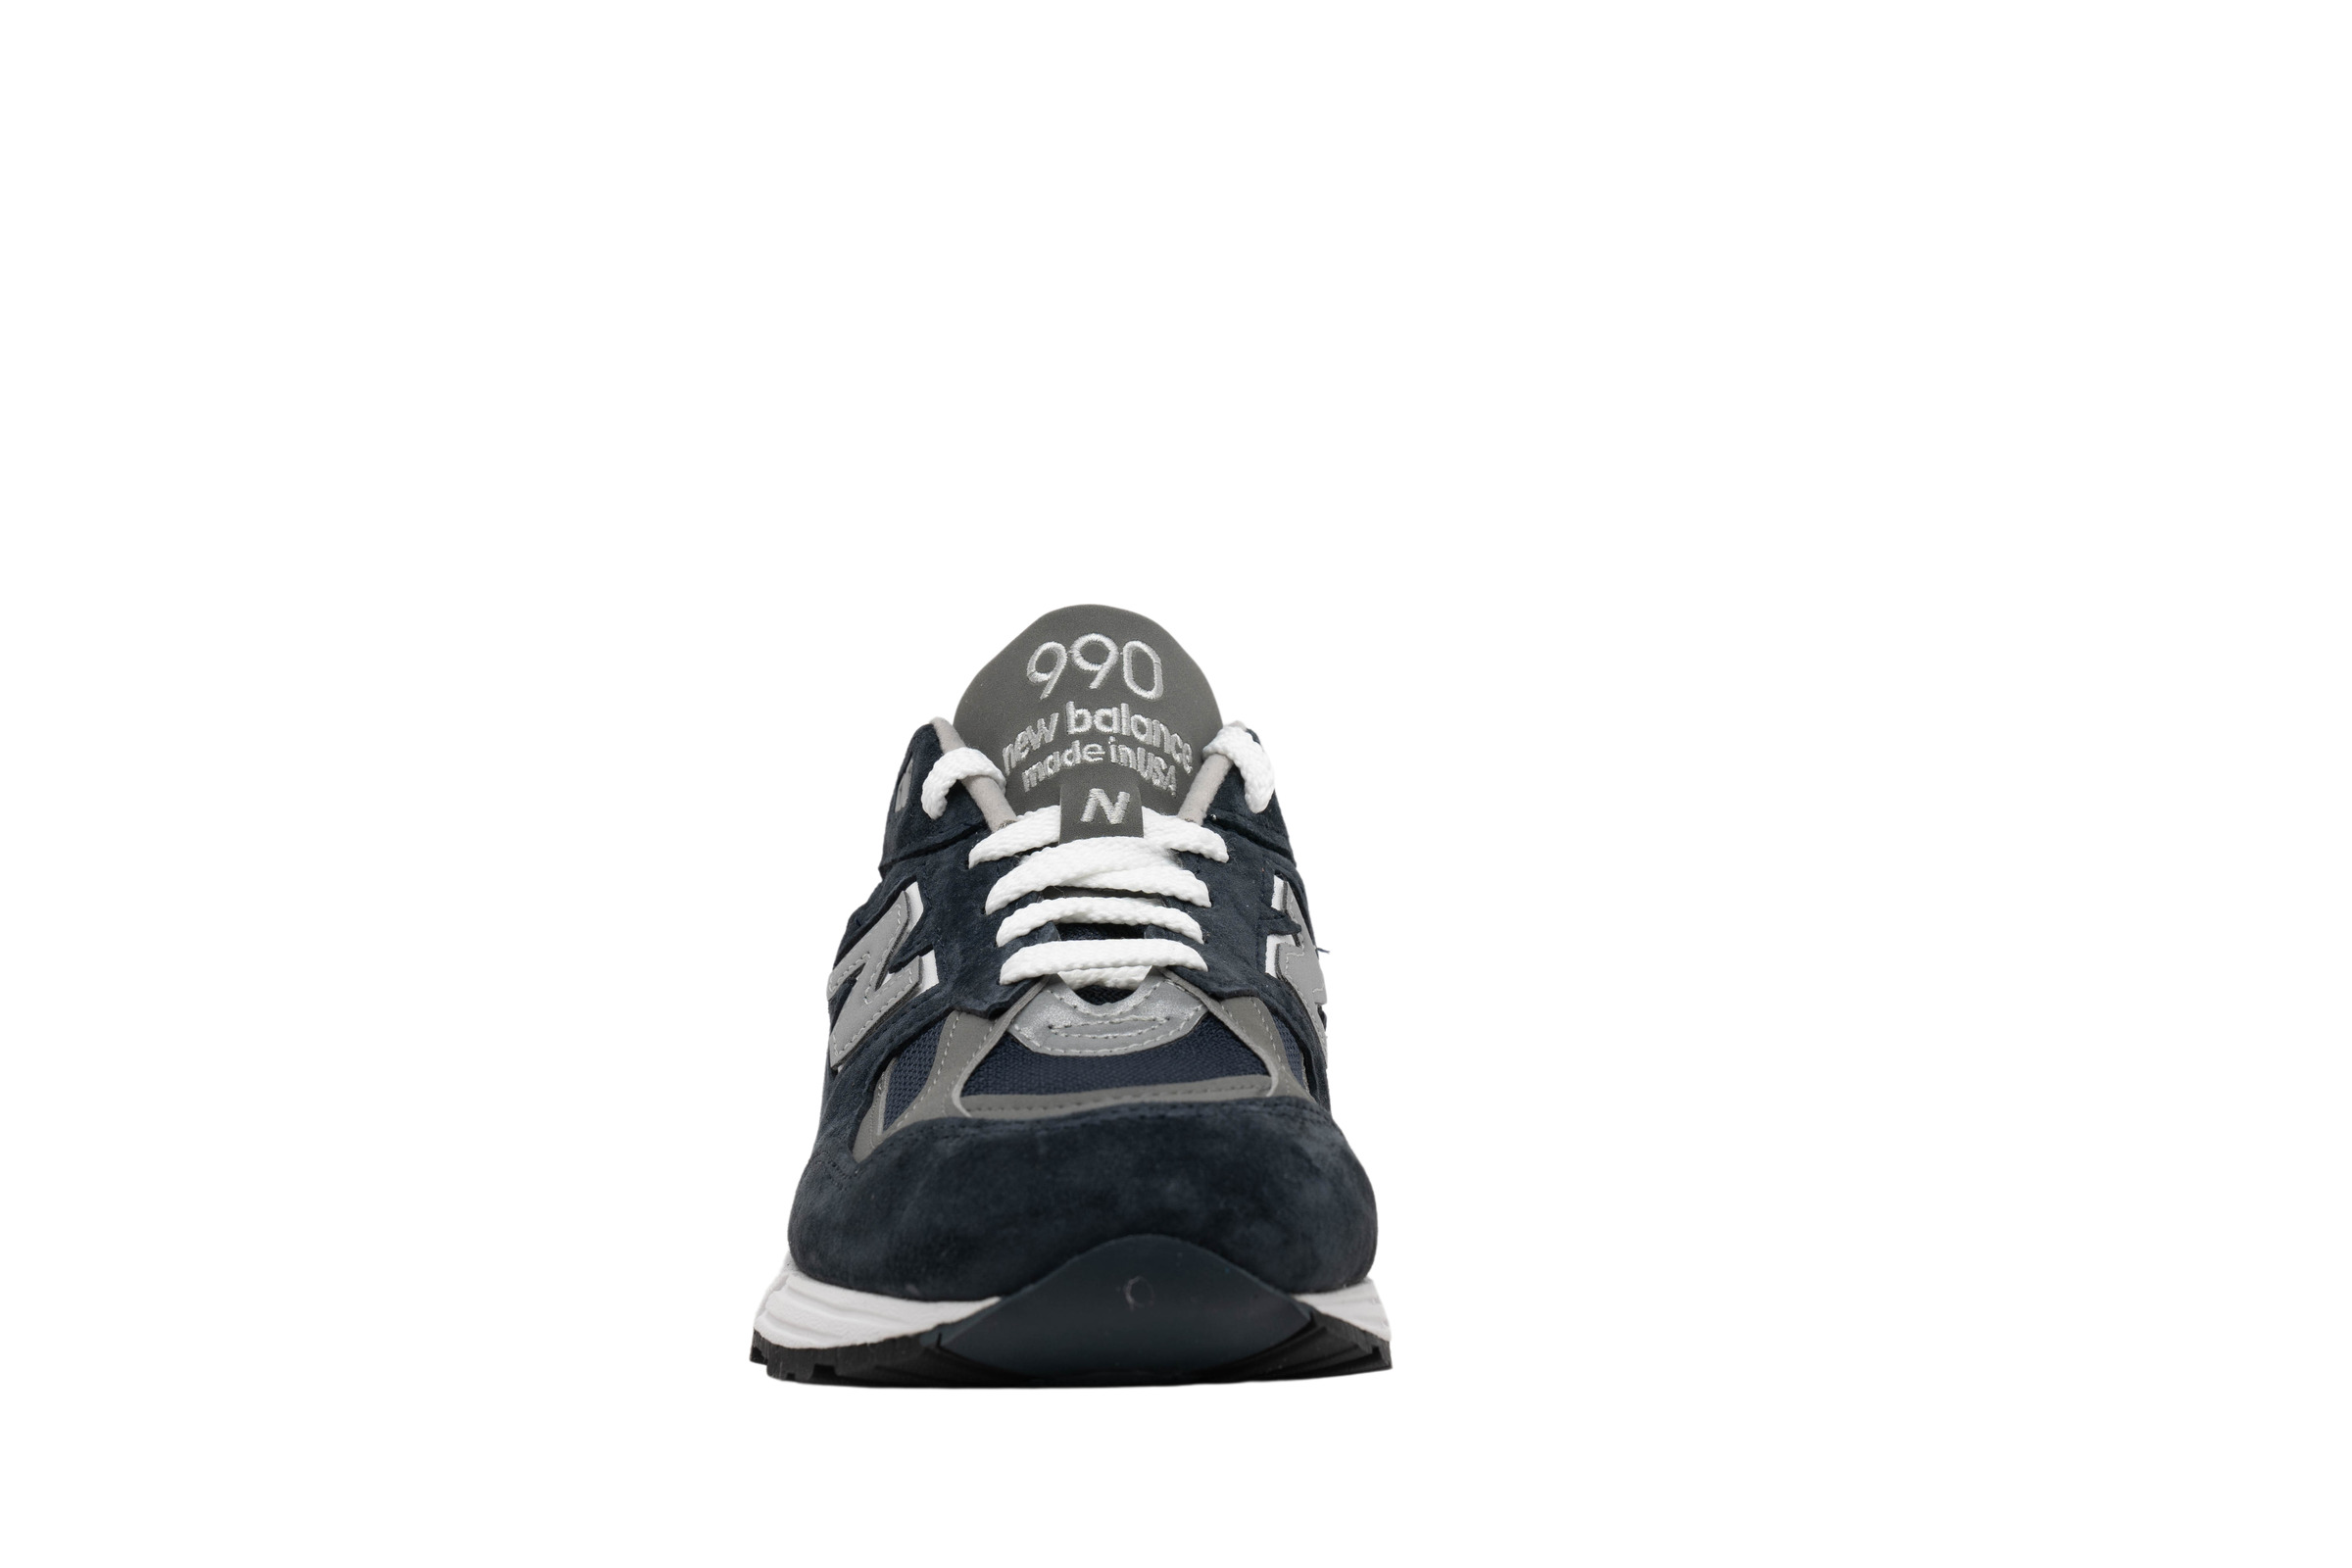 New Balance 990v2 Made in USA Navy White for Sale | Authenticity 